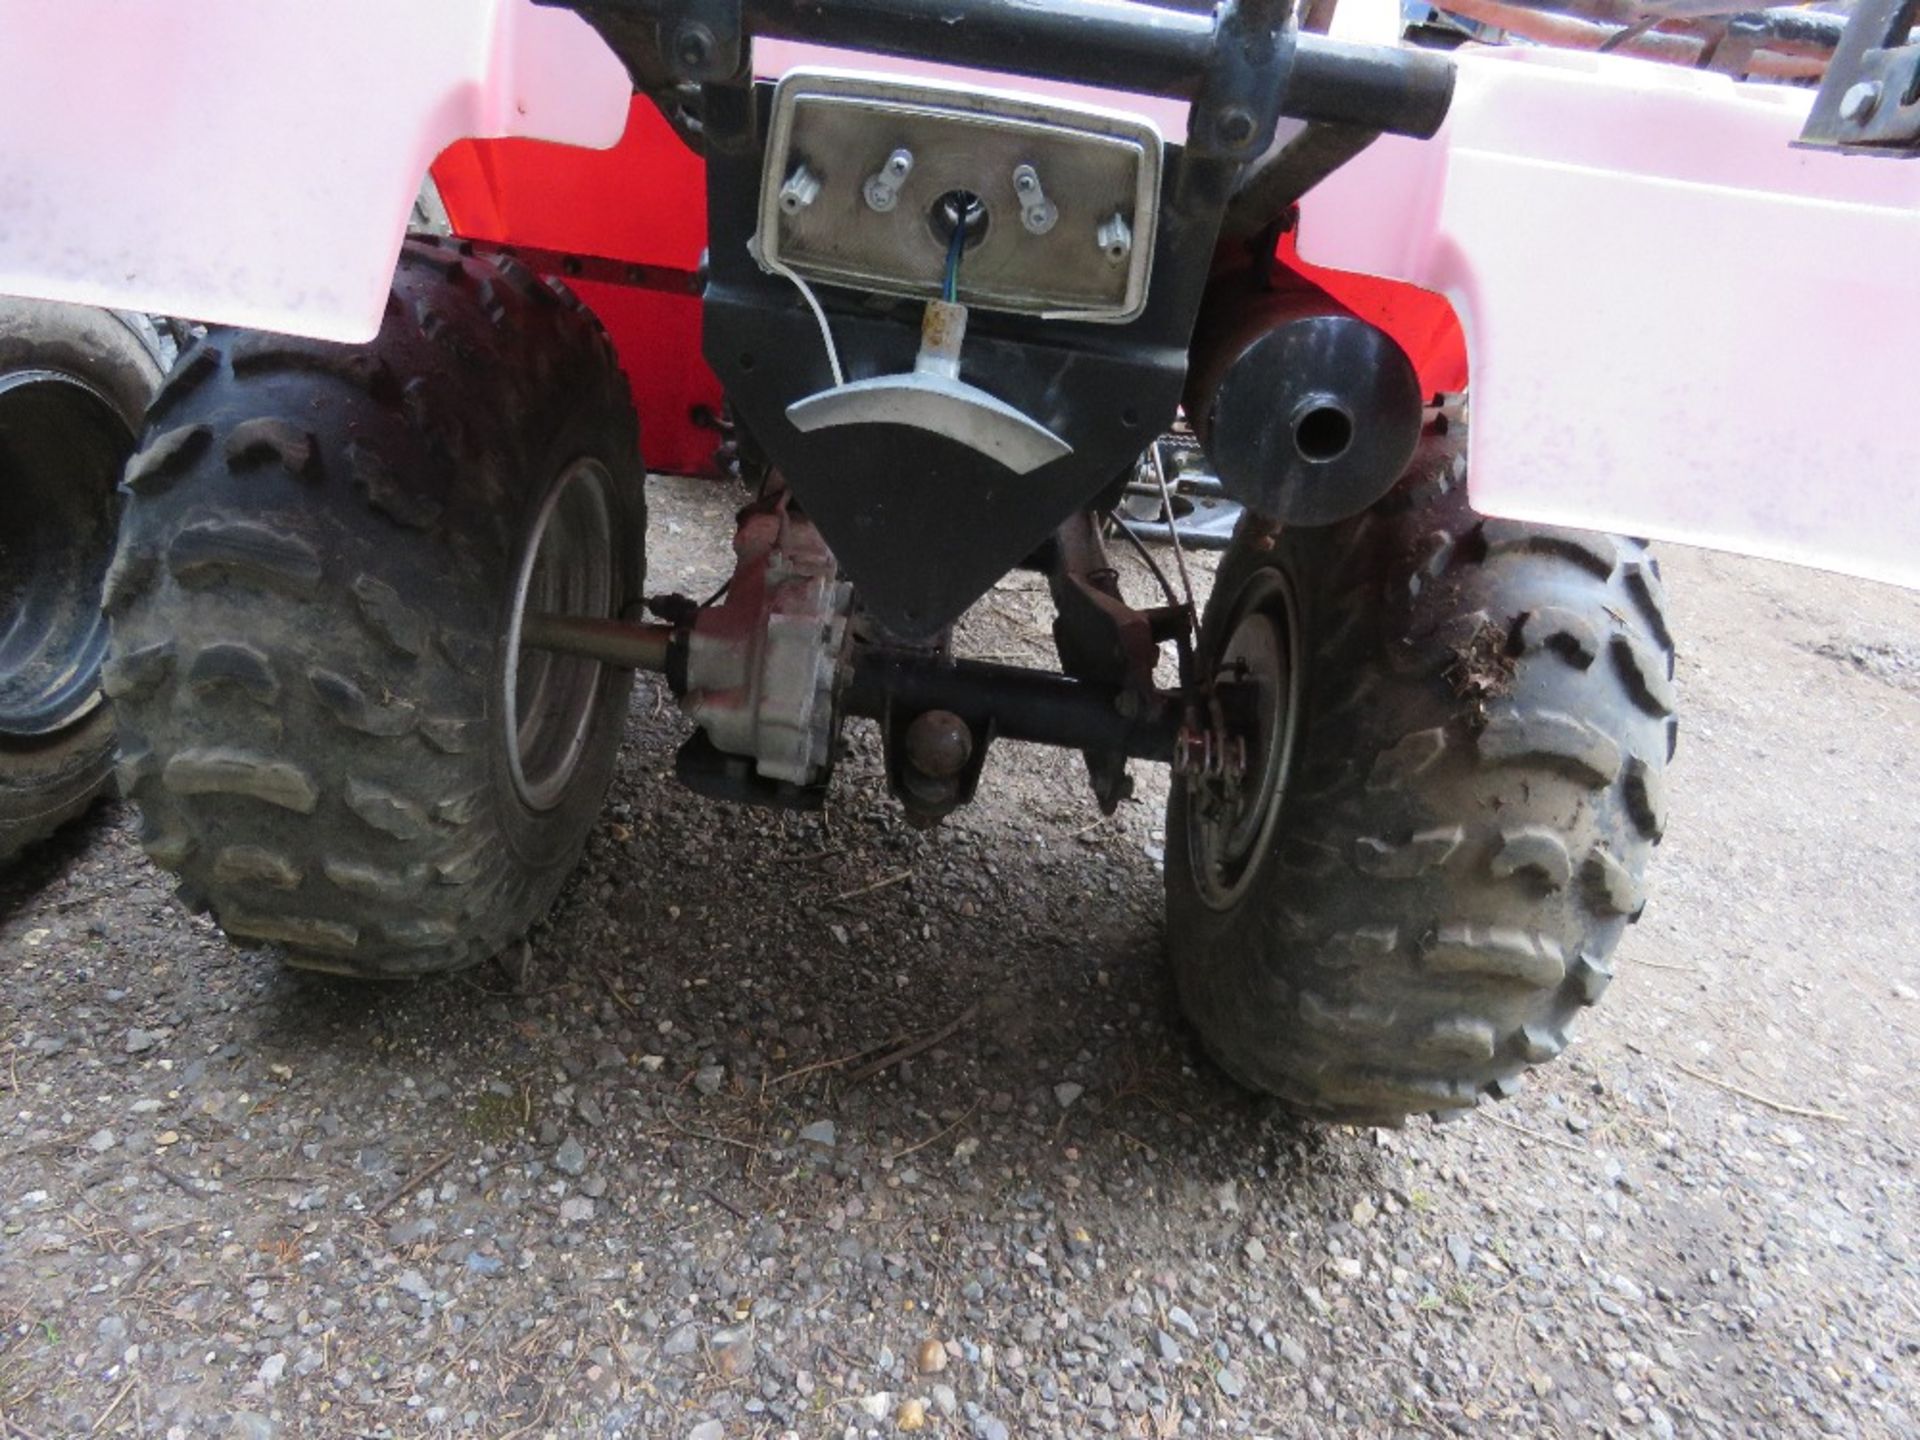 JIANSHE 2WD PETROL ENGINED QUAD BIKE, CONDITION UNKNOWN, SOLD AS NON RUNNER. - Image 5 of 7